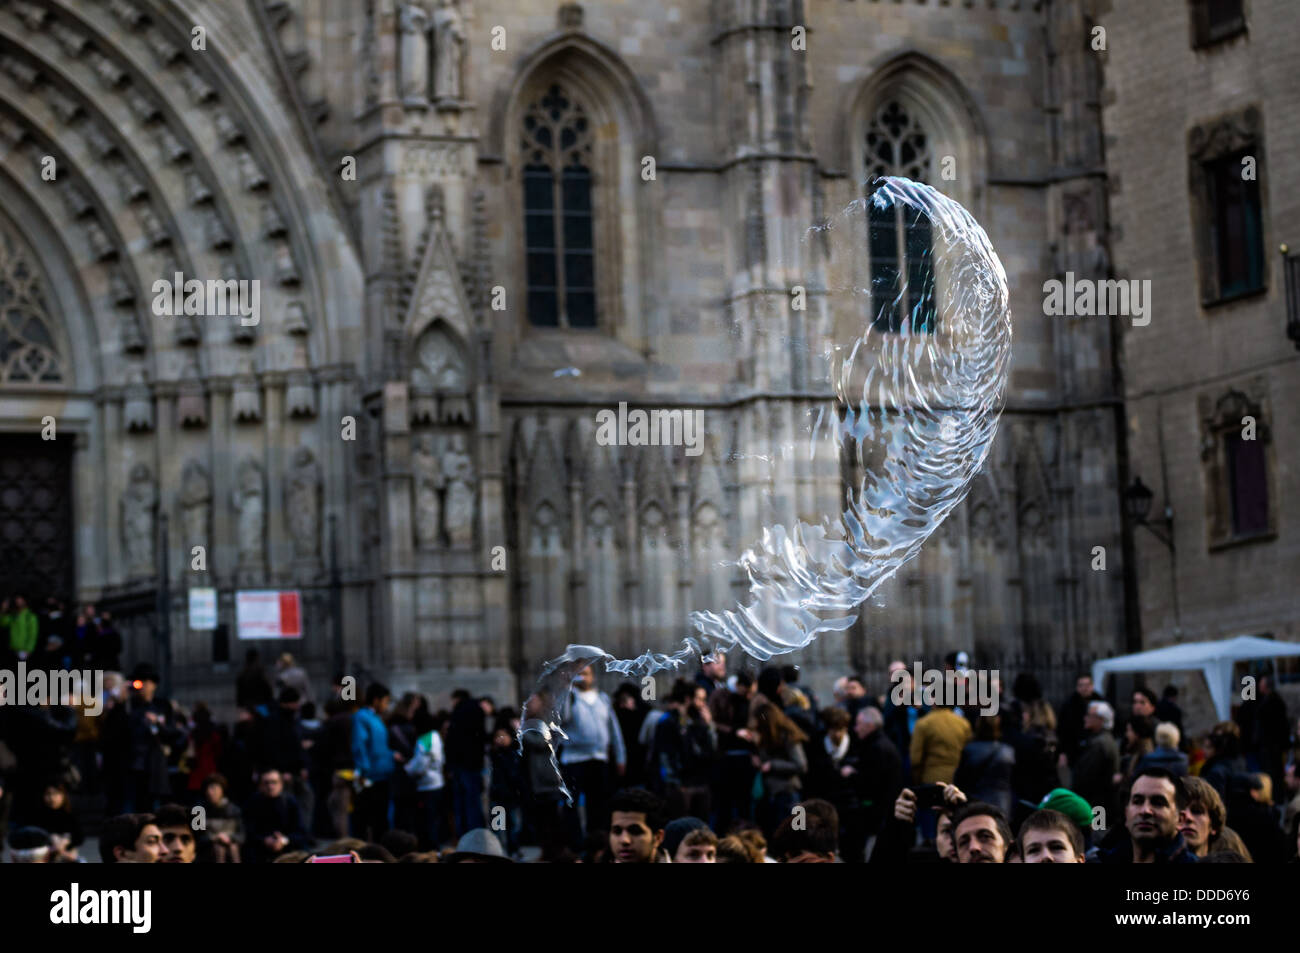 An exploding bubble during an exhibition in Barcelona Cathedral square. Spain. Stock Photo